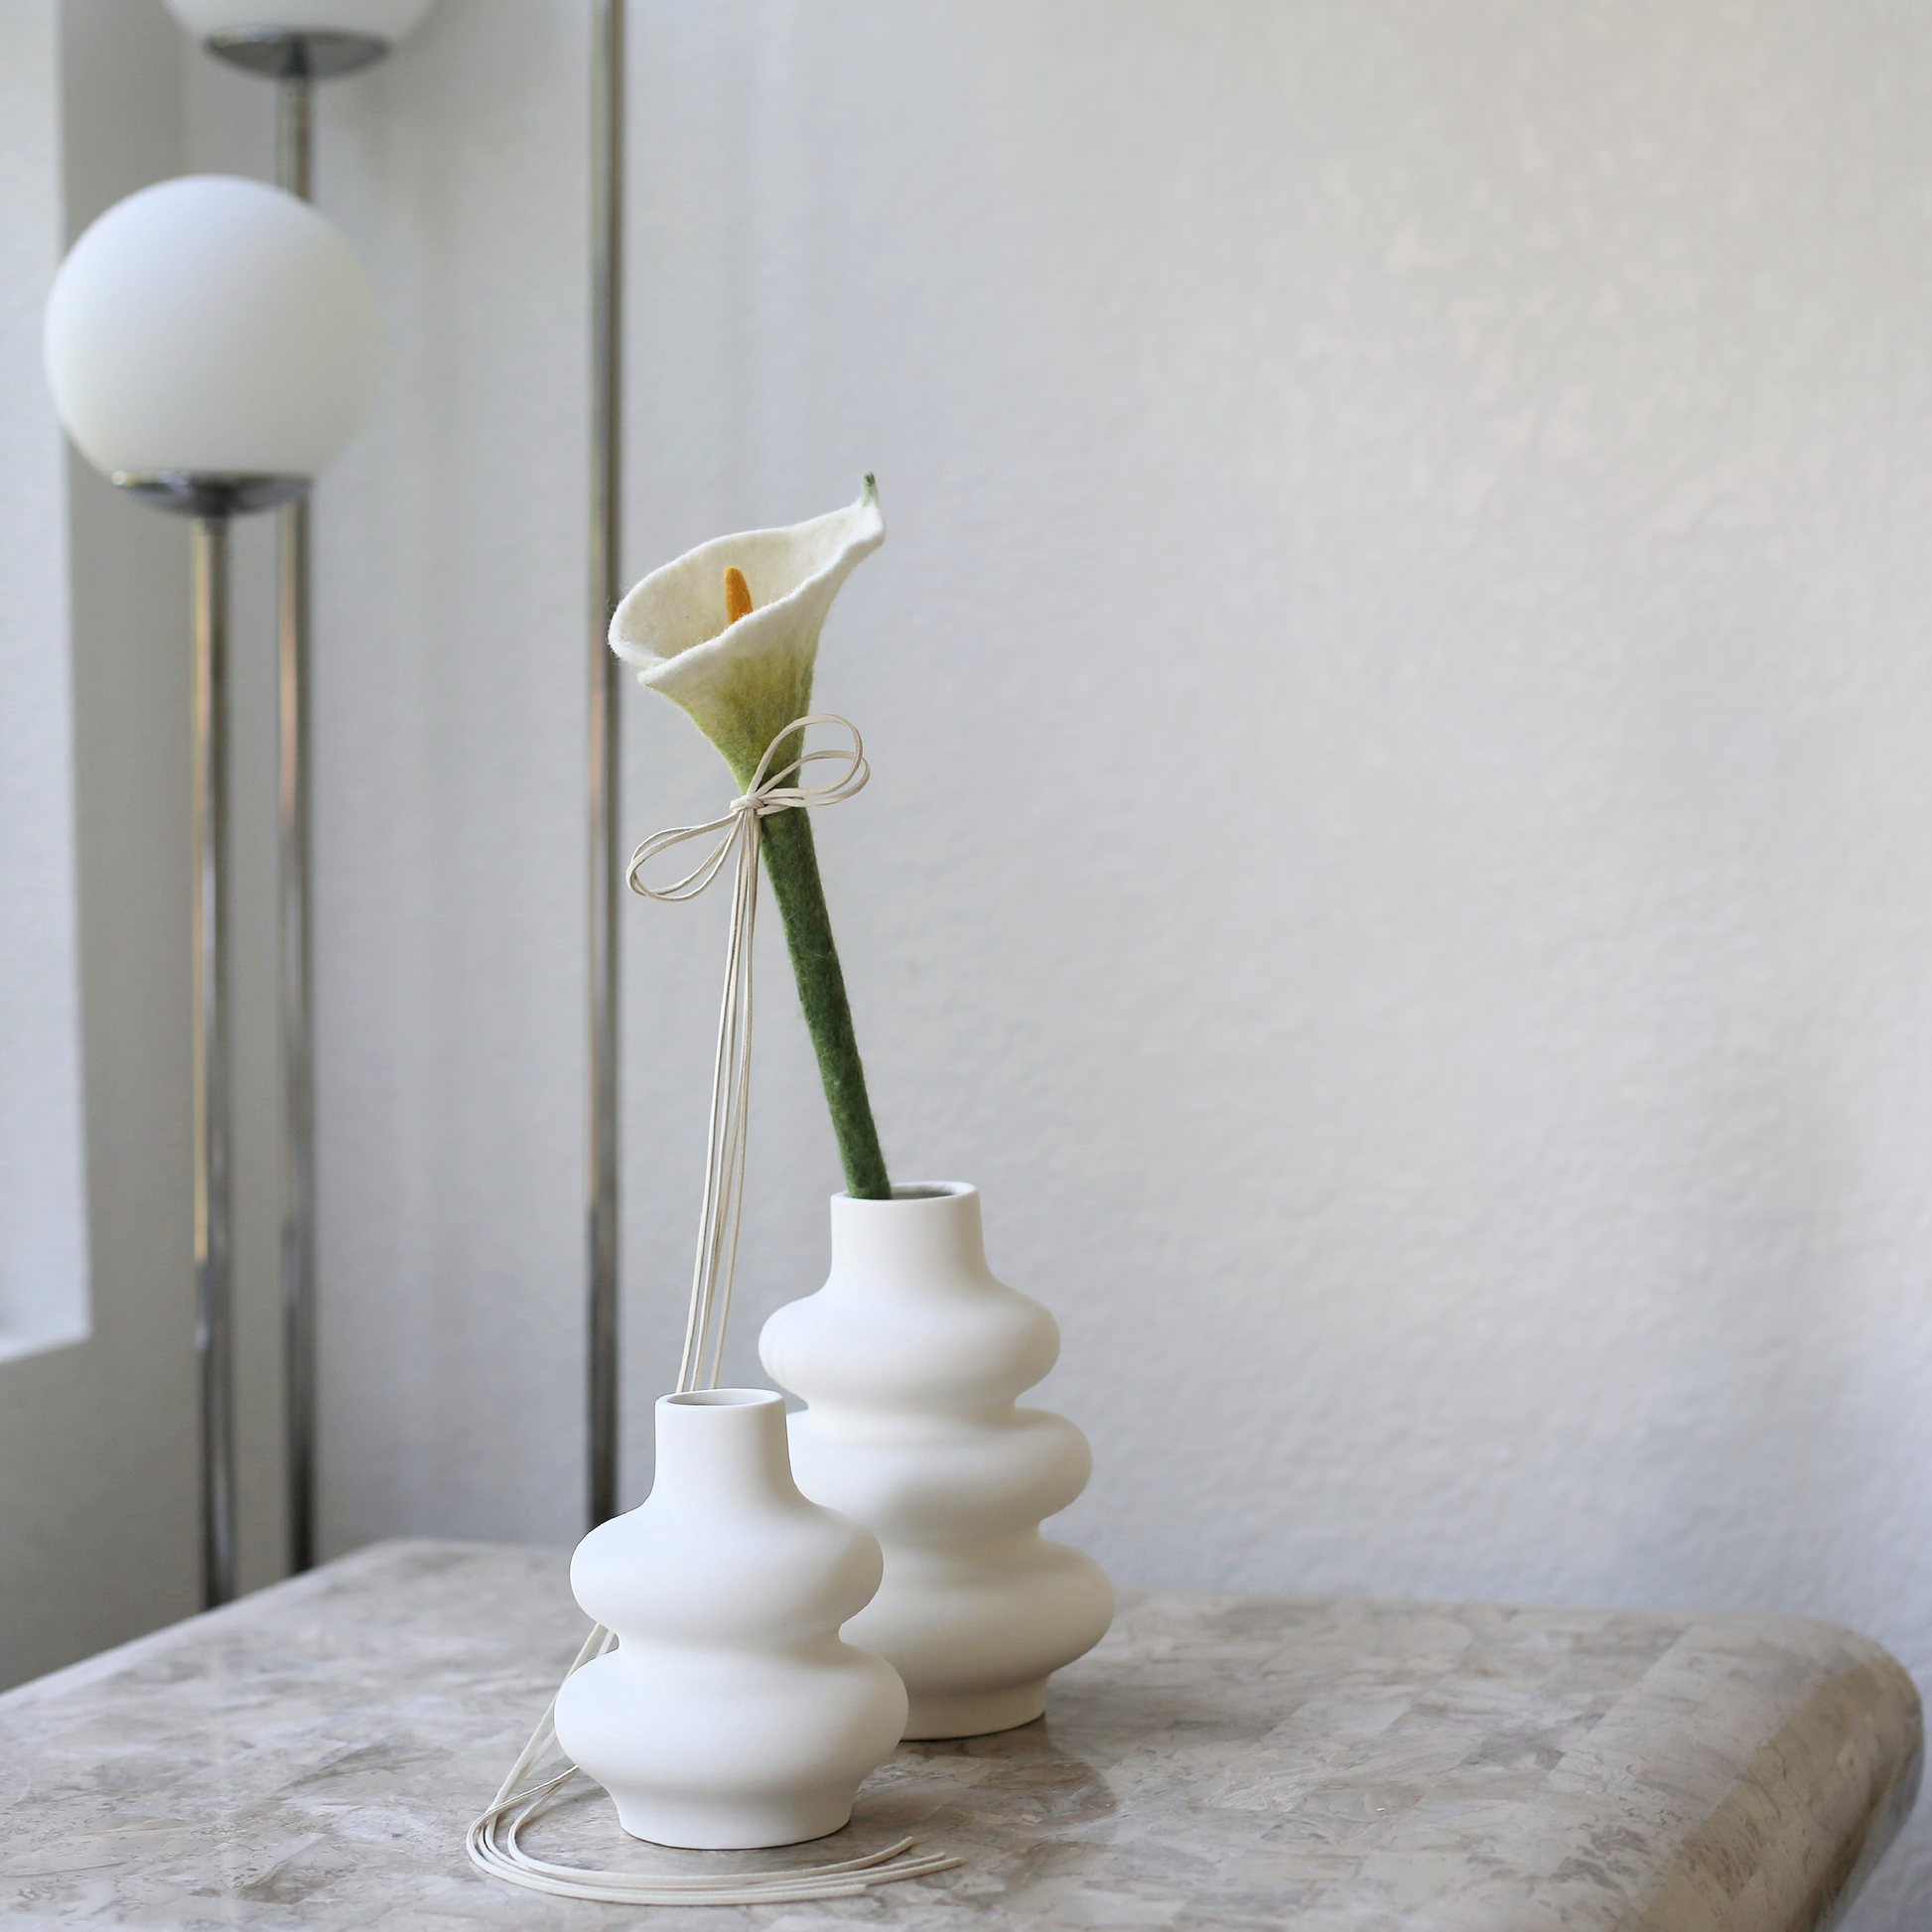 calla lily aesthetic cat toy teaser wand in minimalist vase in modern minimalist home by catenary home modern cat furniture company